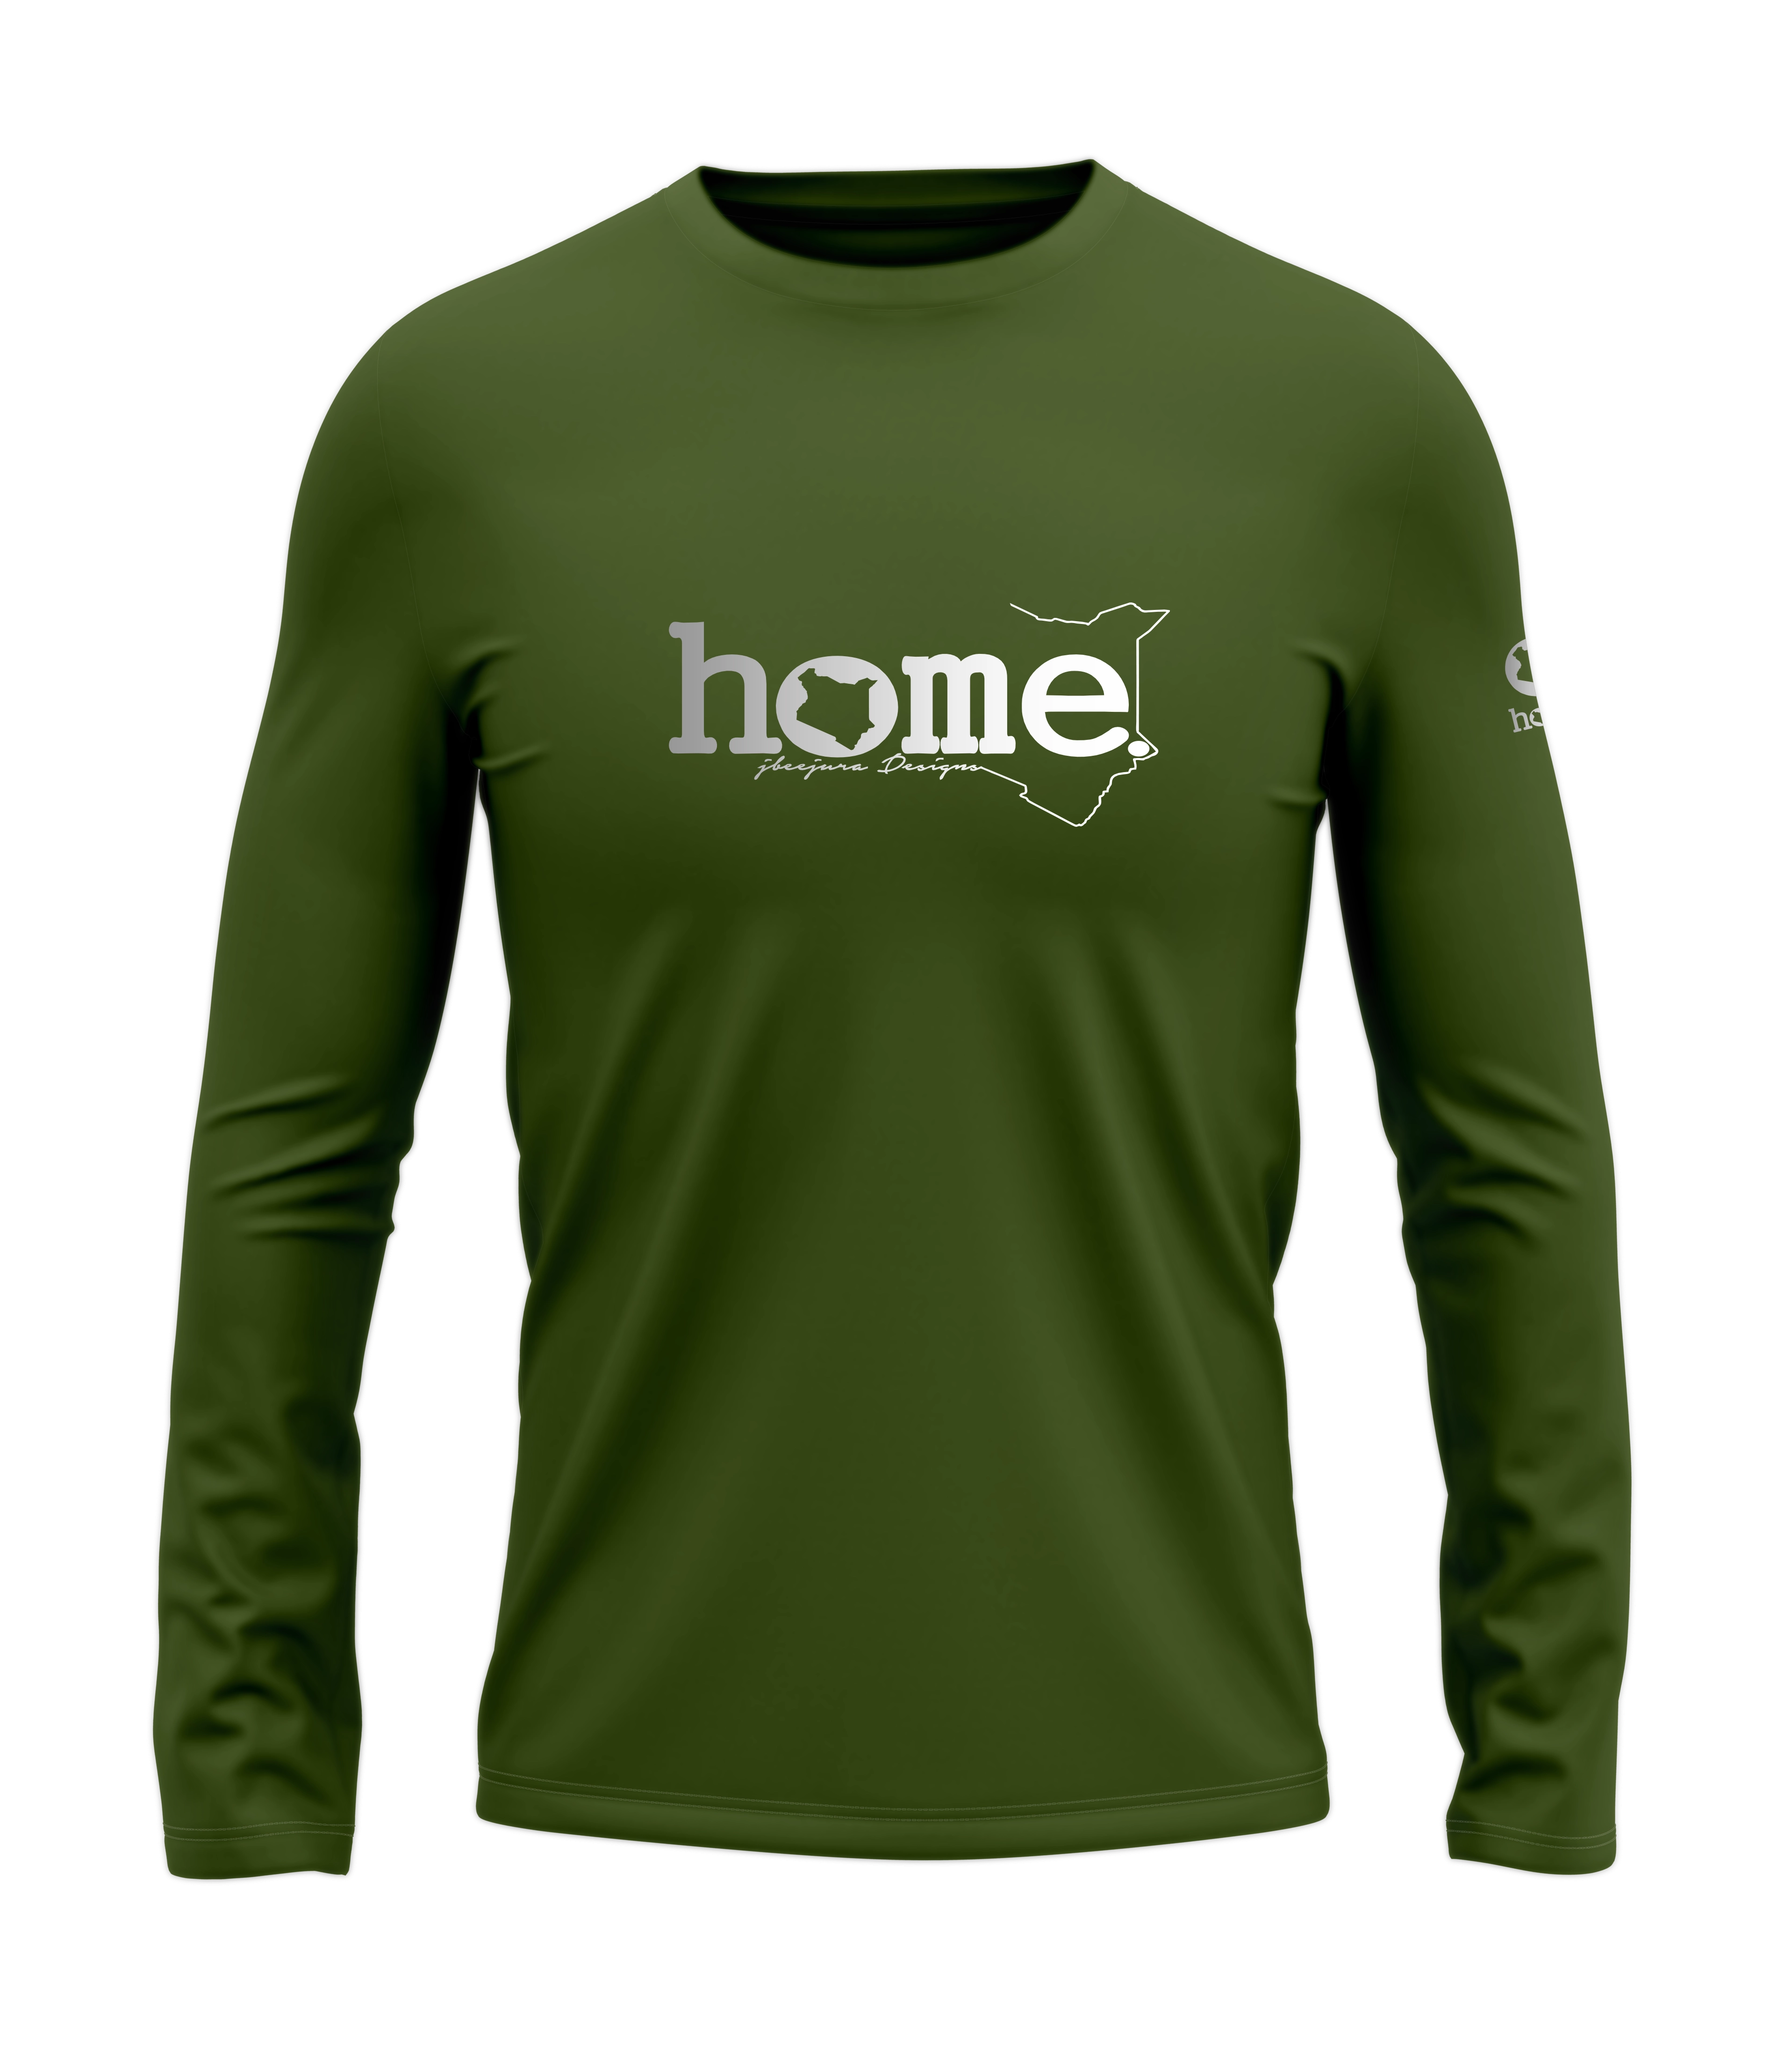 home_254 LONG-SLEEVED JUNGLE GREEN T-SHIRT WITH A SILVER CLASSIC WORDS PRINT – COTTON PLUS FABRIC